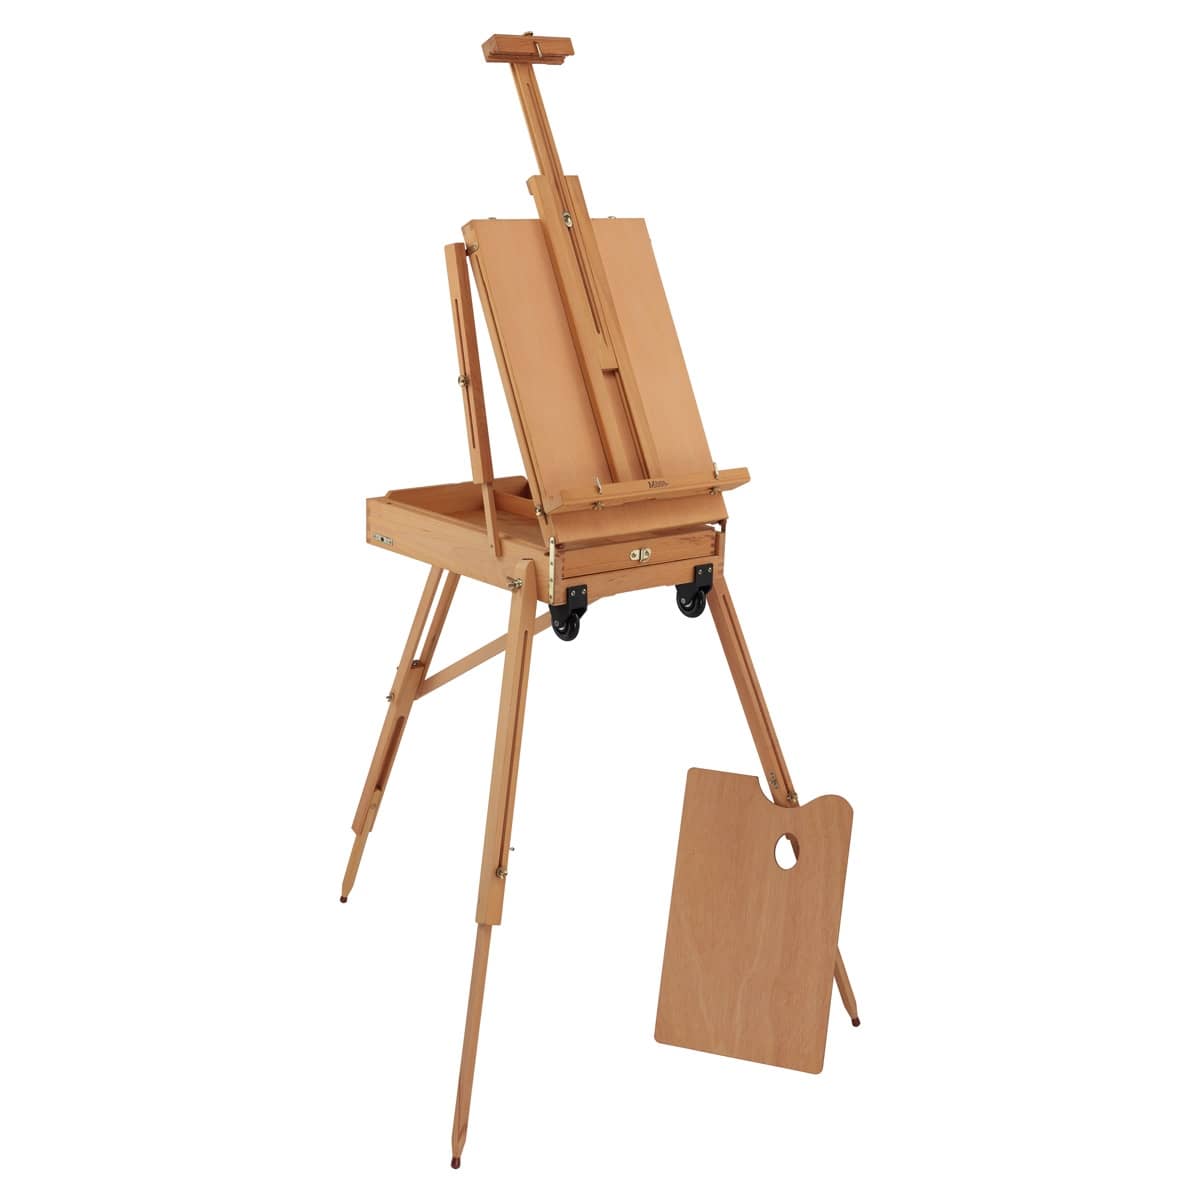 Traveling Monet French Easel